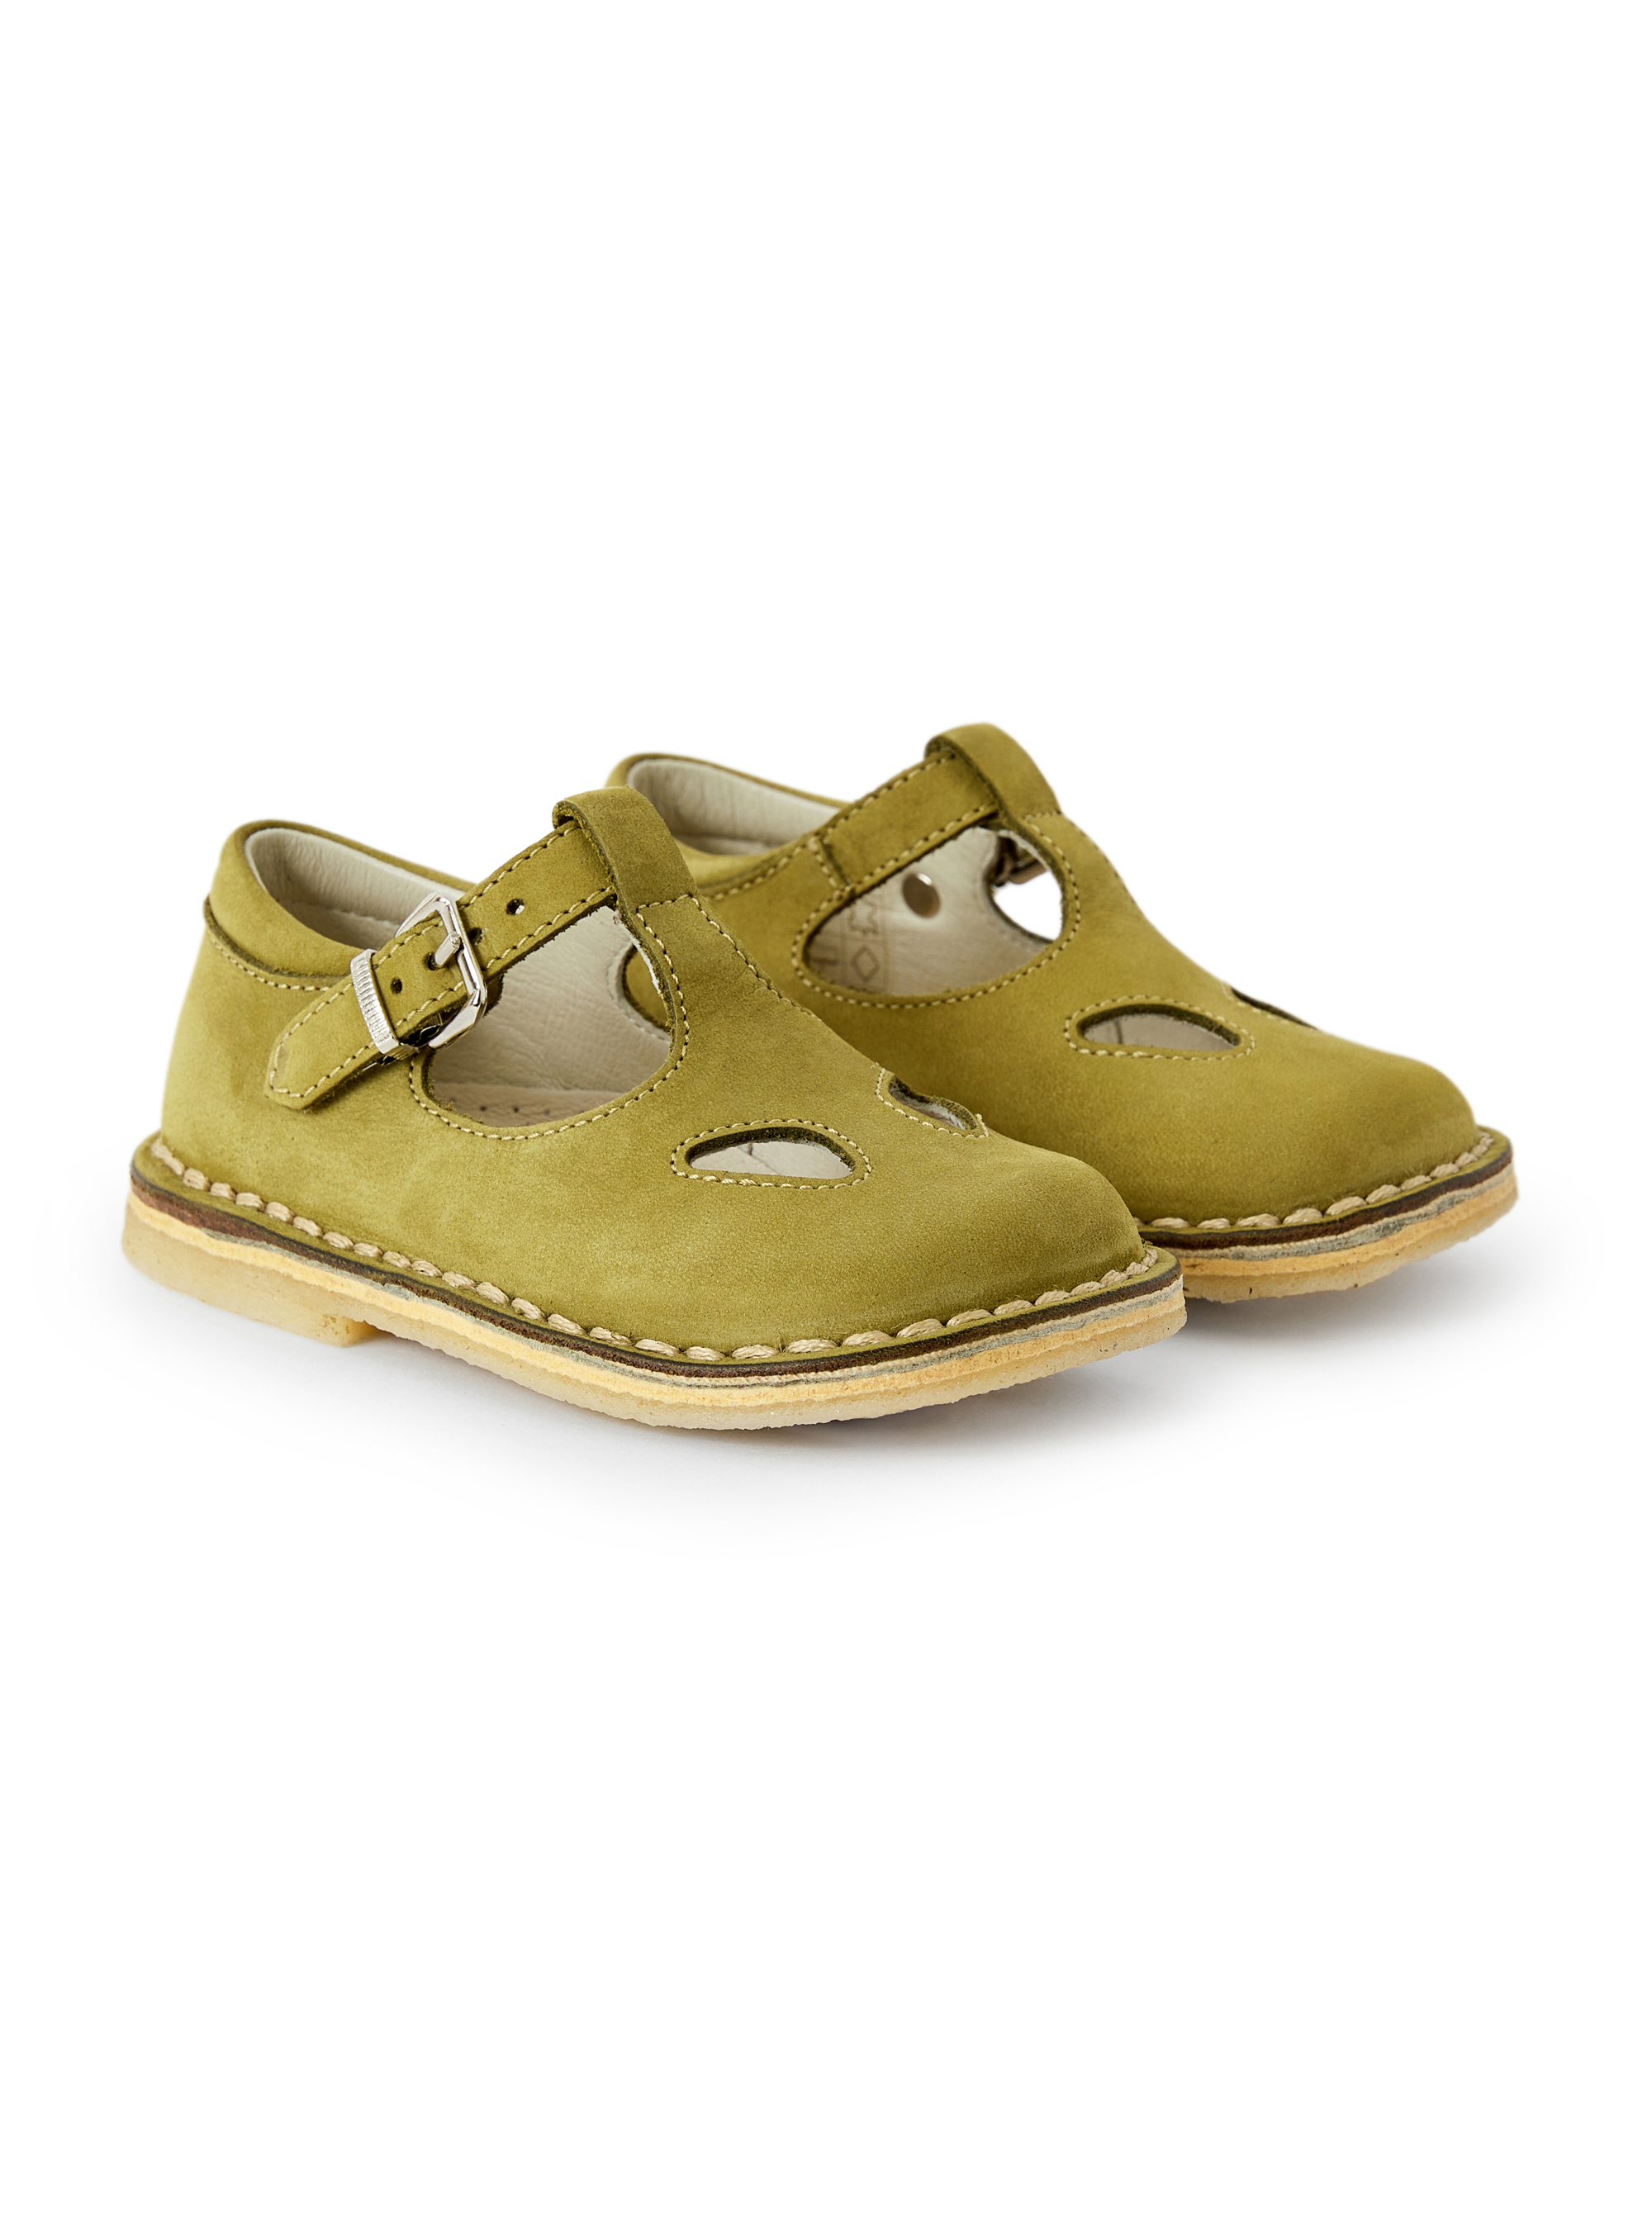 Green leather sandals - Shoes - Il Gufo